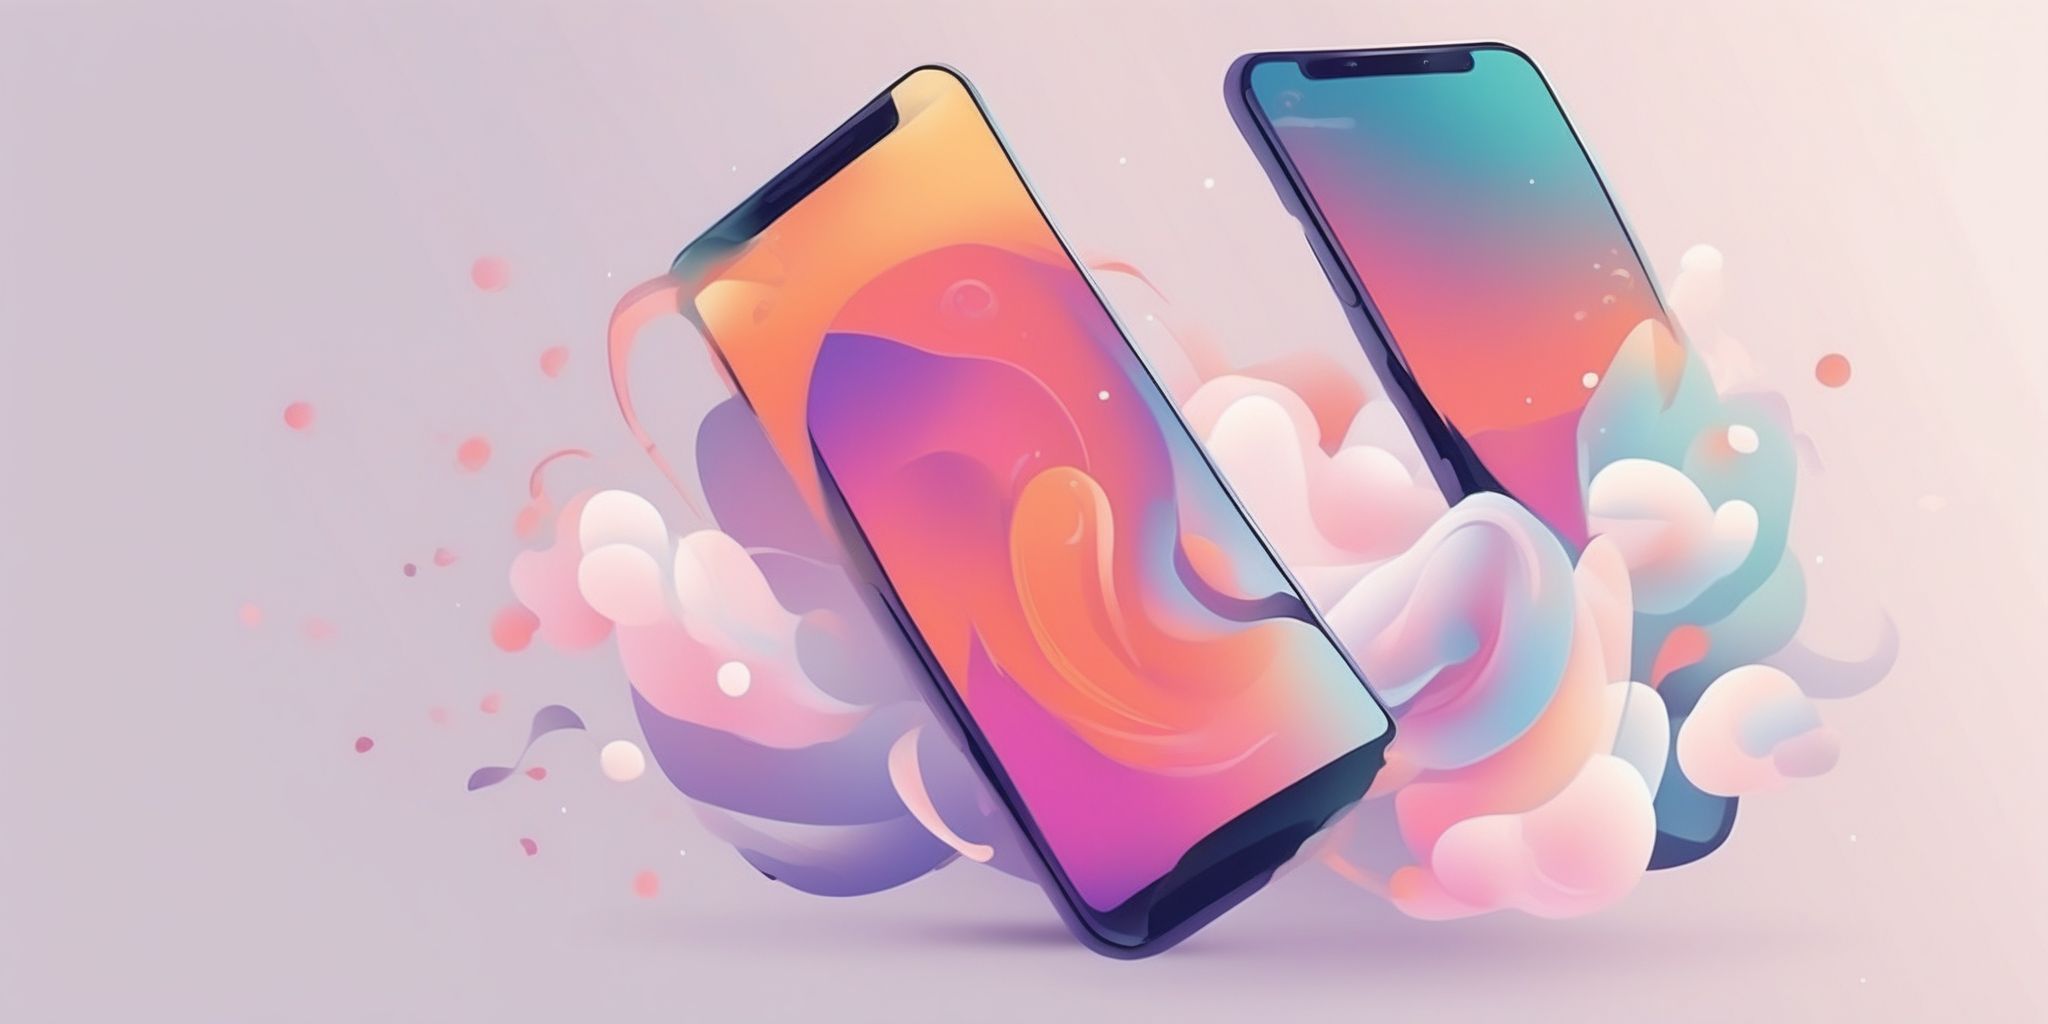 phone in illustration style with gradients and white background